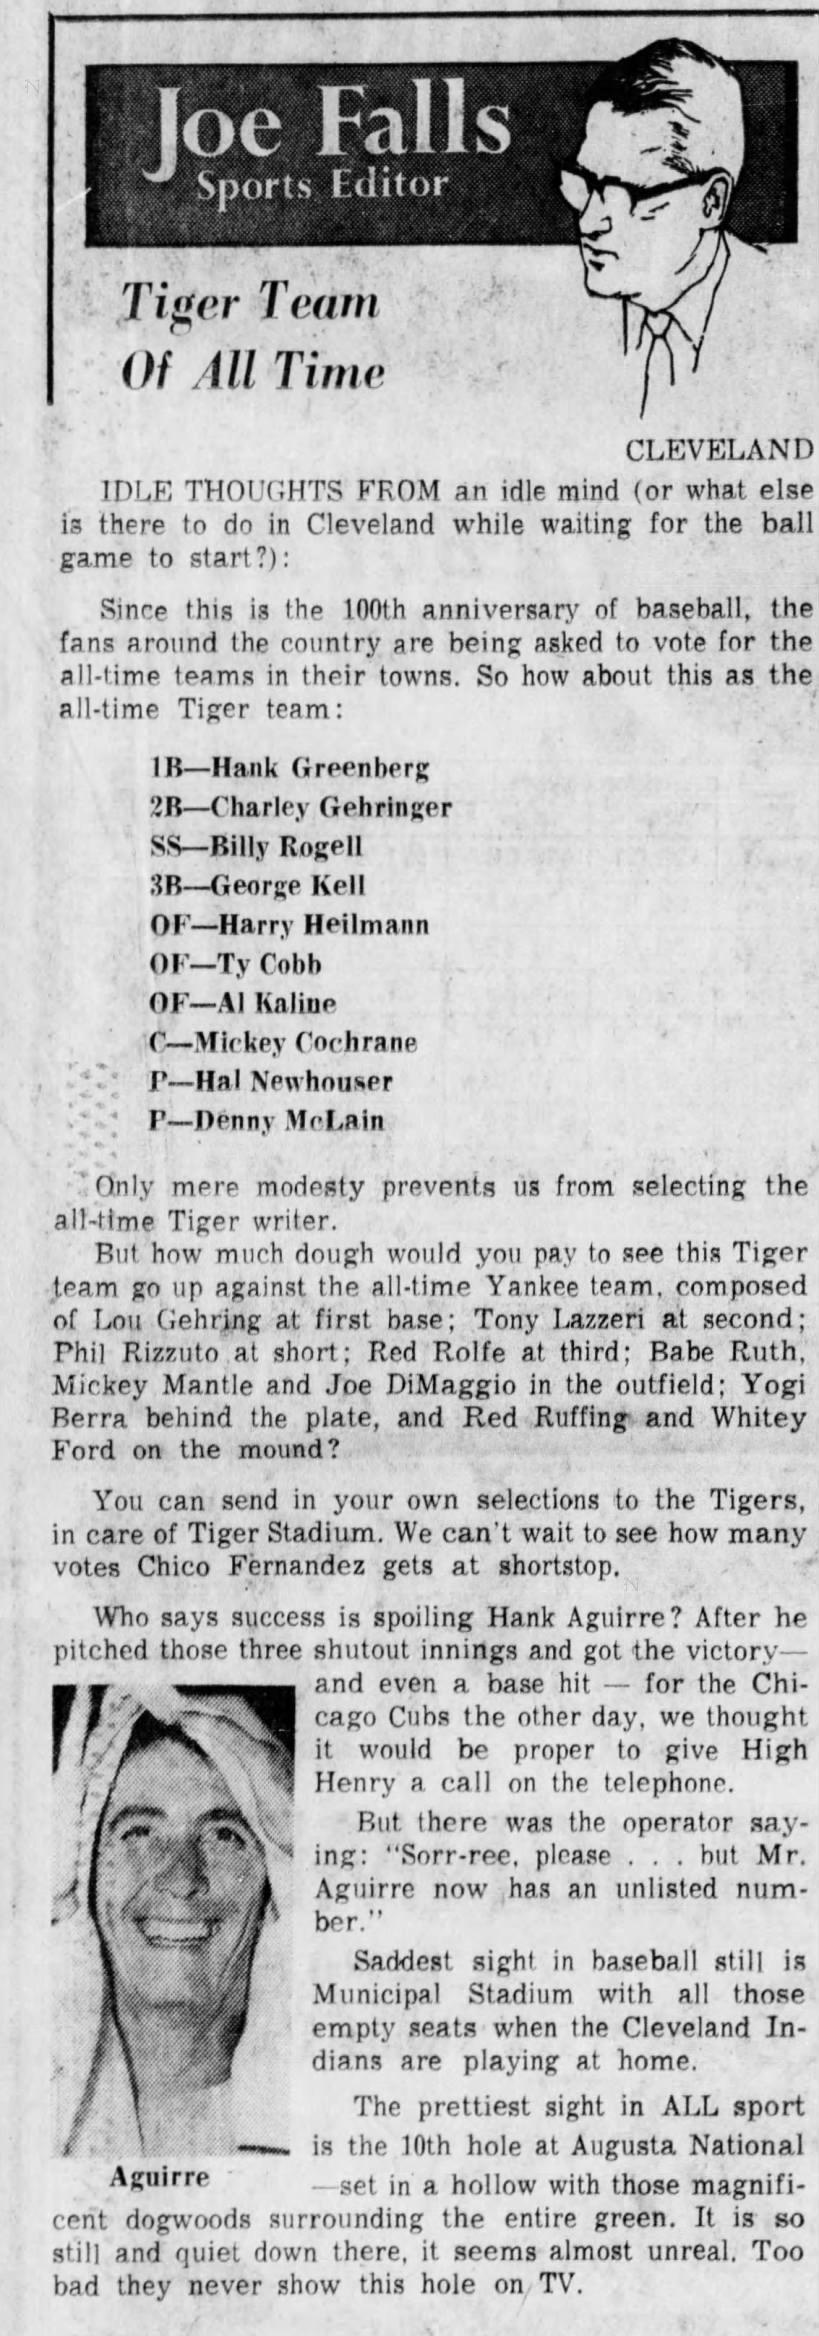 Tiger Team Of All Time